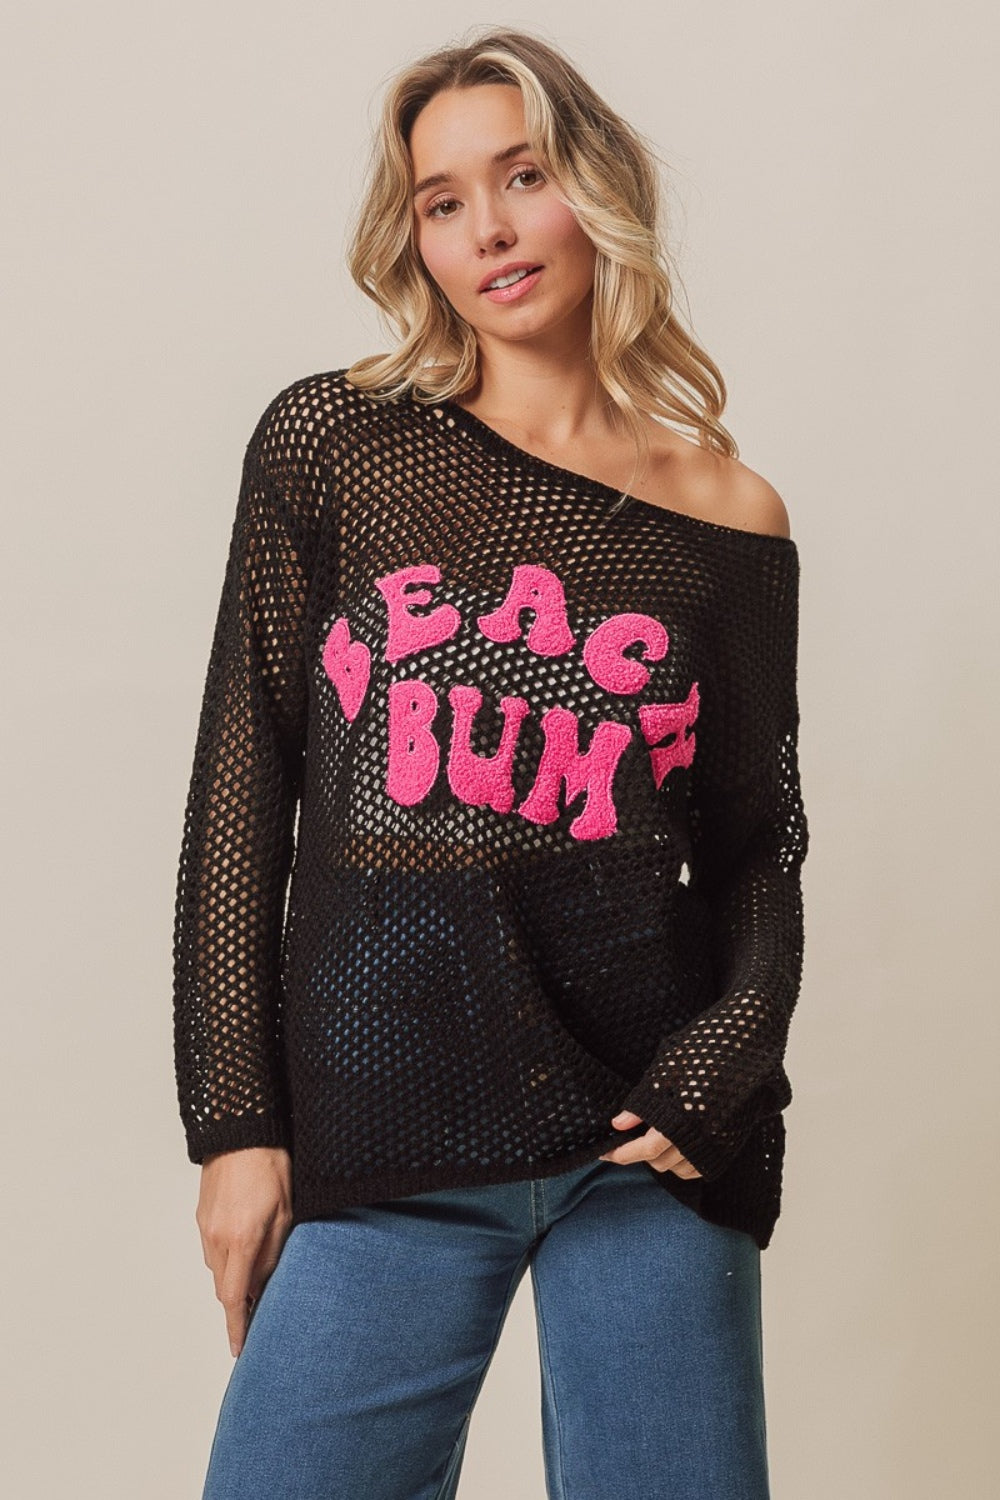 Beach Bum Embroidered Knit Cover Up